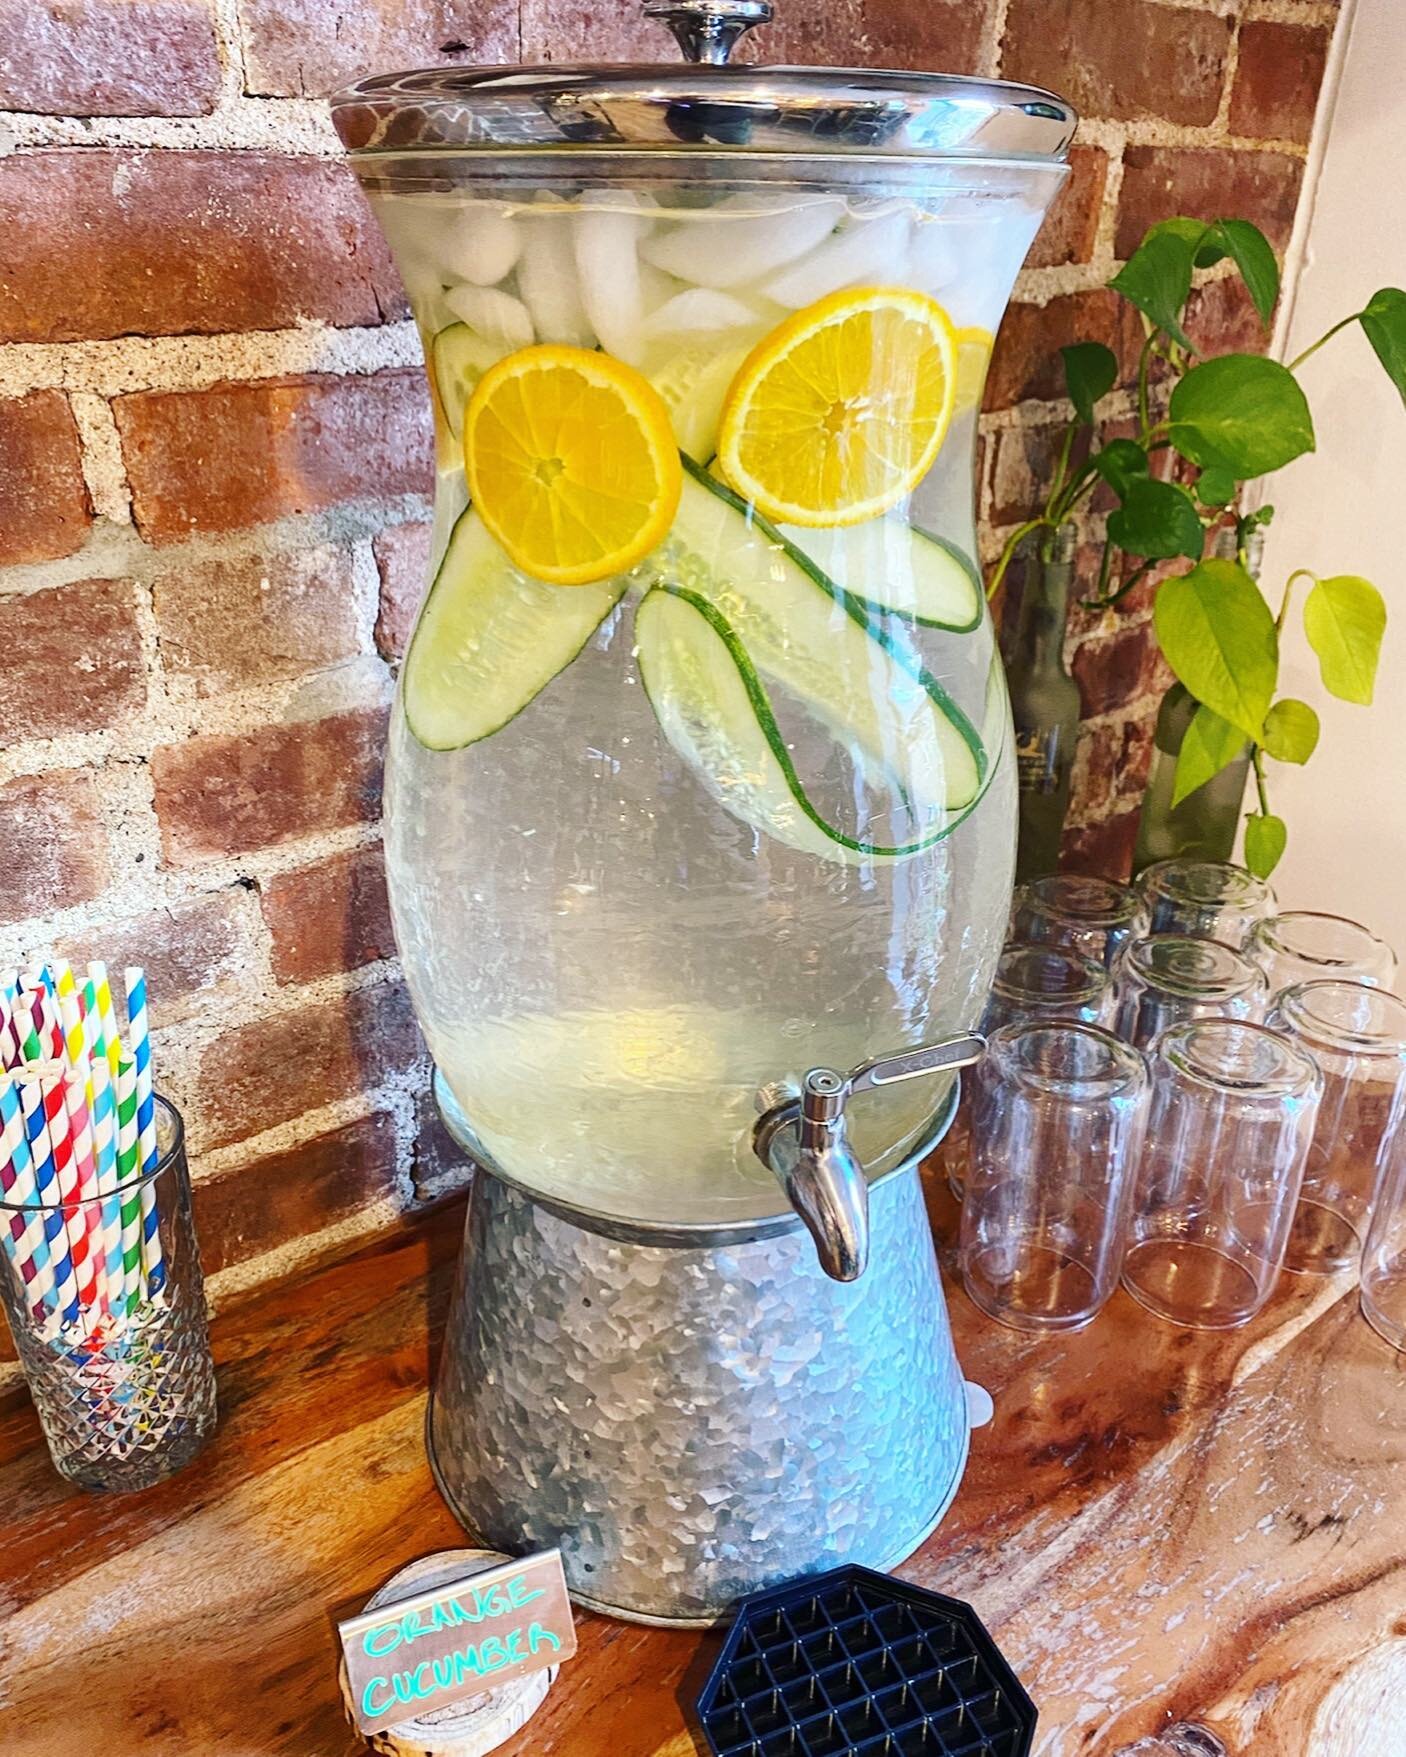 Our members always tell us that our delicious fruit infused water motivates them to stay hydrated throughout the day! What flavor should we try next? Let us know in the comments below 👇 #Yum #InfusedWater #MemberPerks #Coworking #MorristownNJ